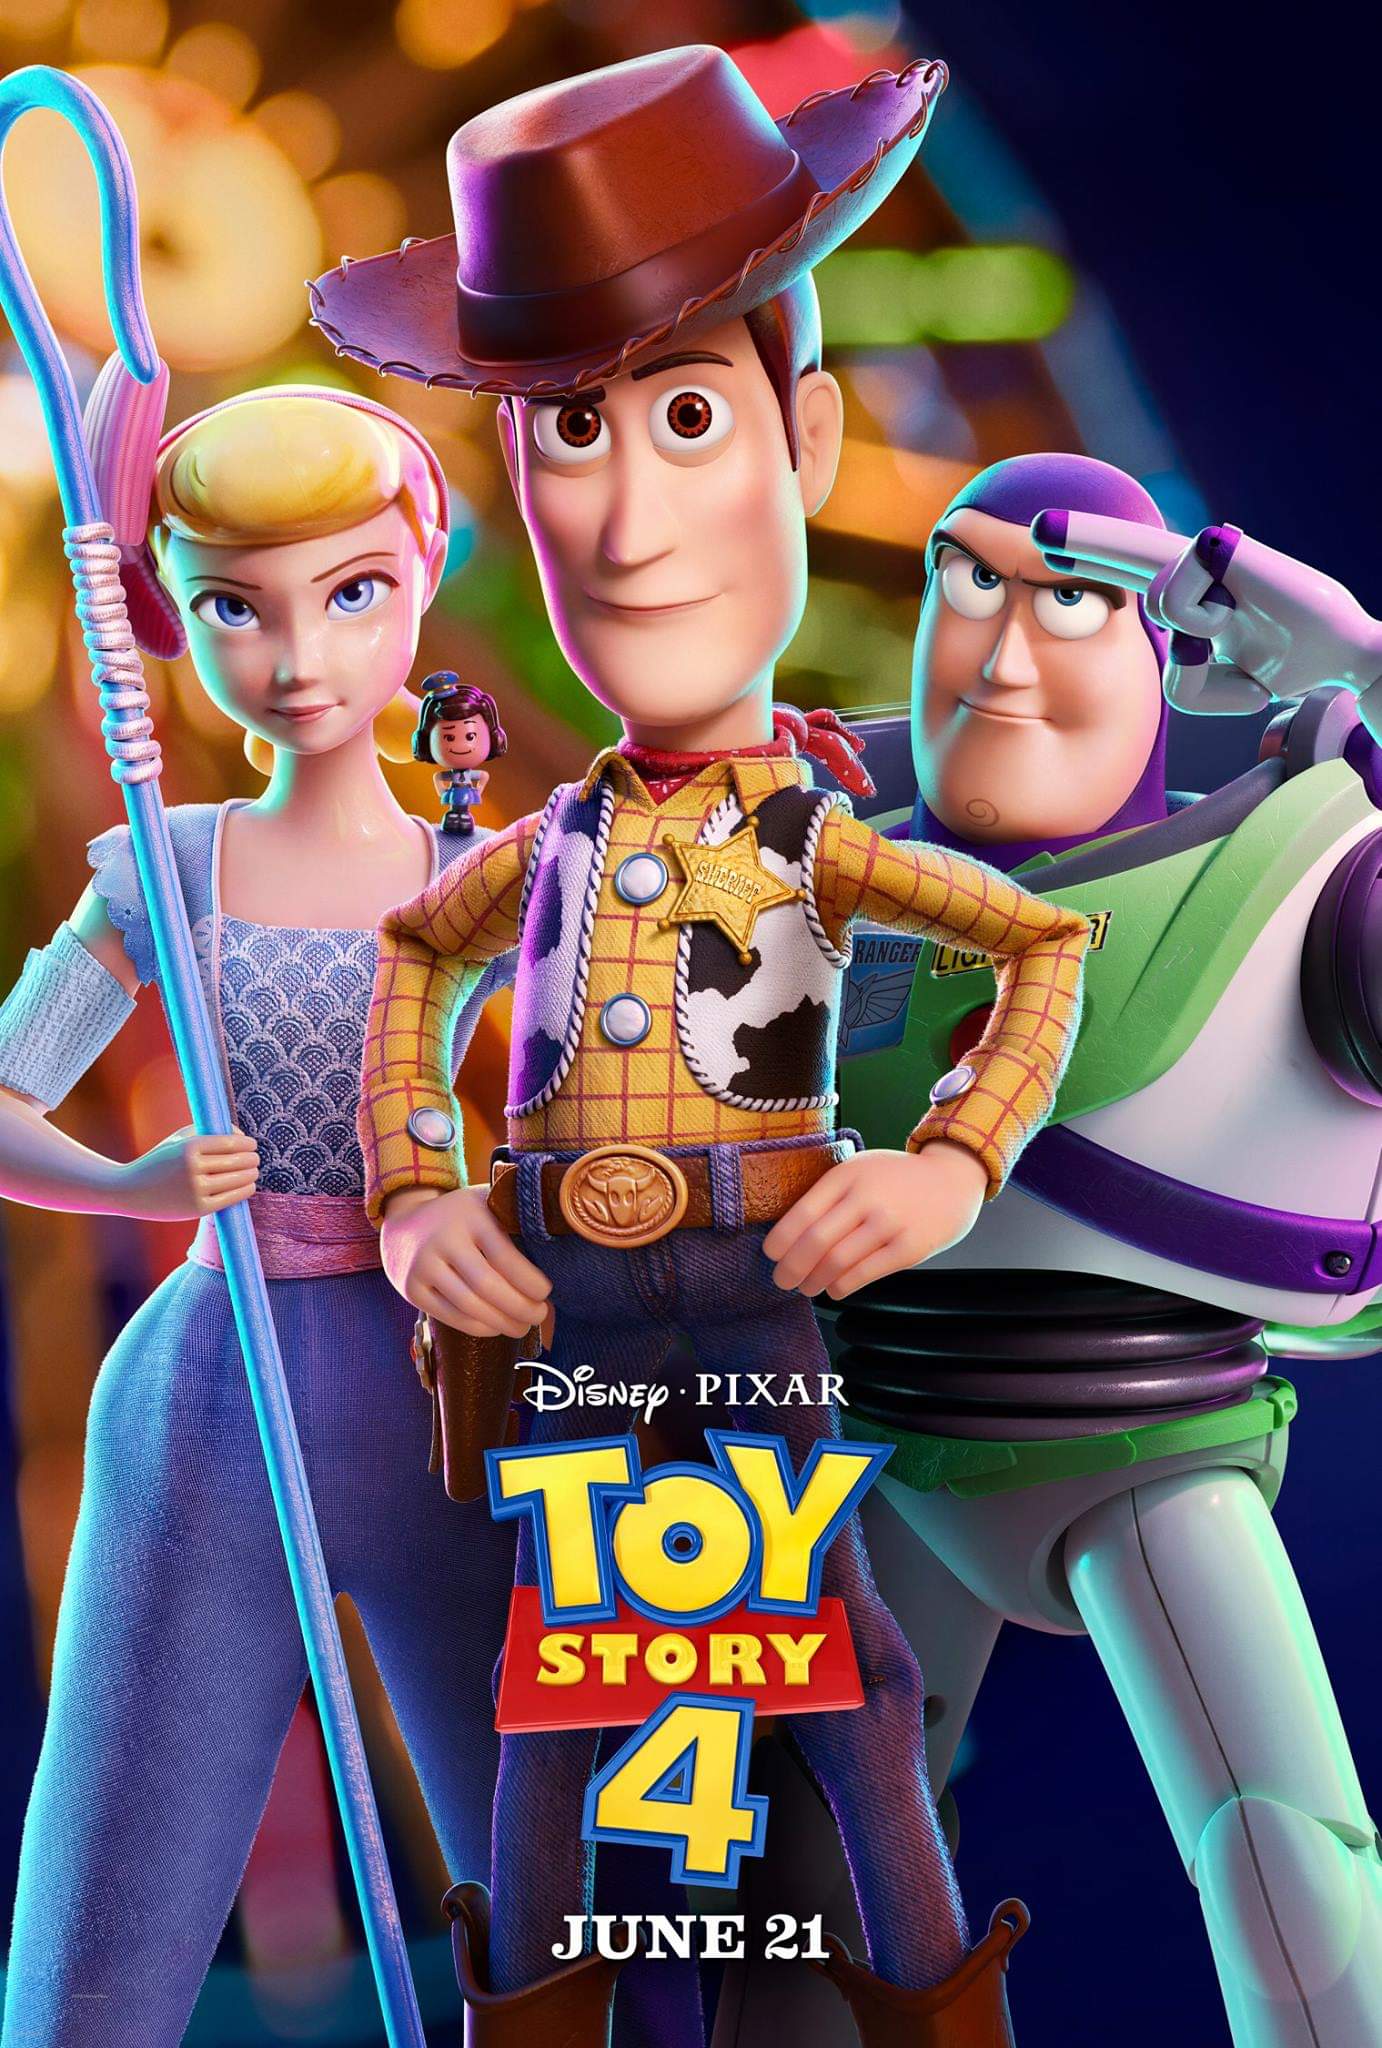 Bonnie  Toy story crafts, Toy story 3, Toy story toons